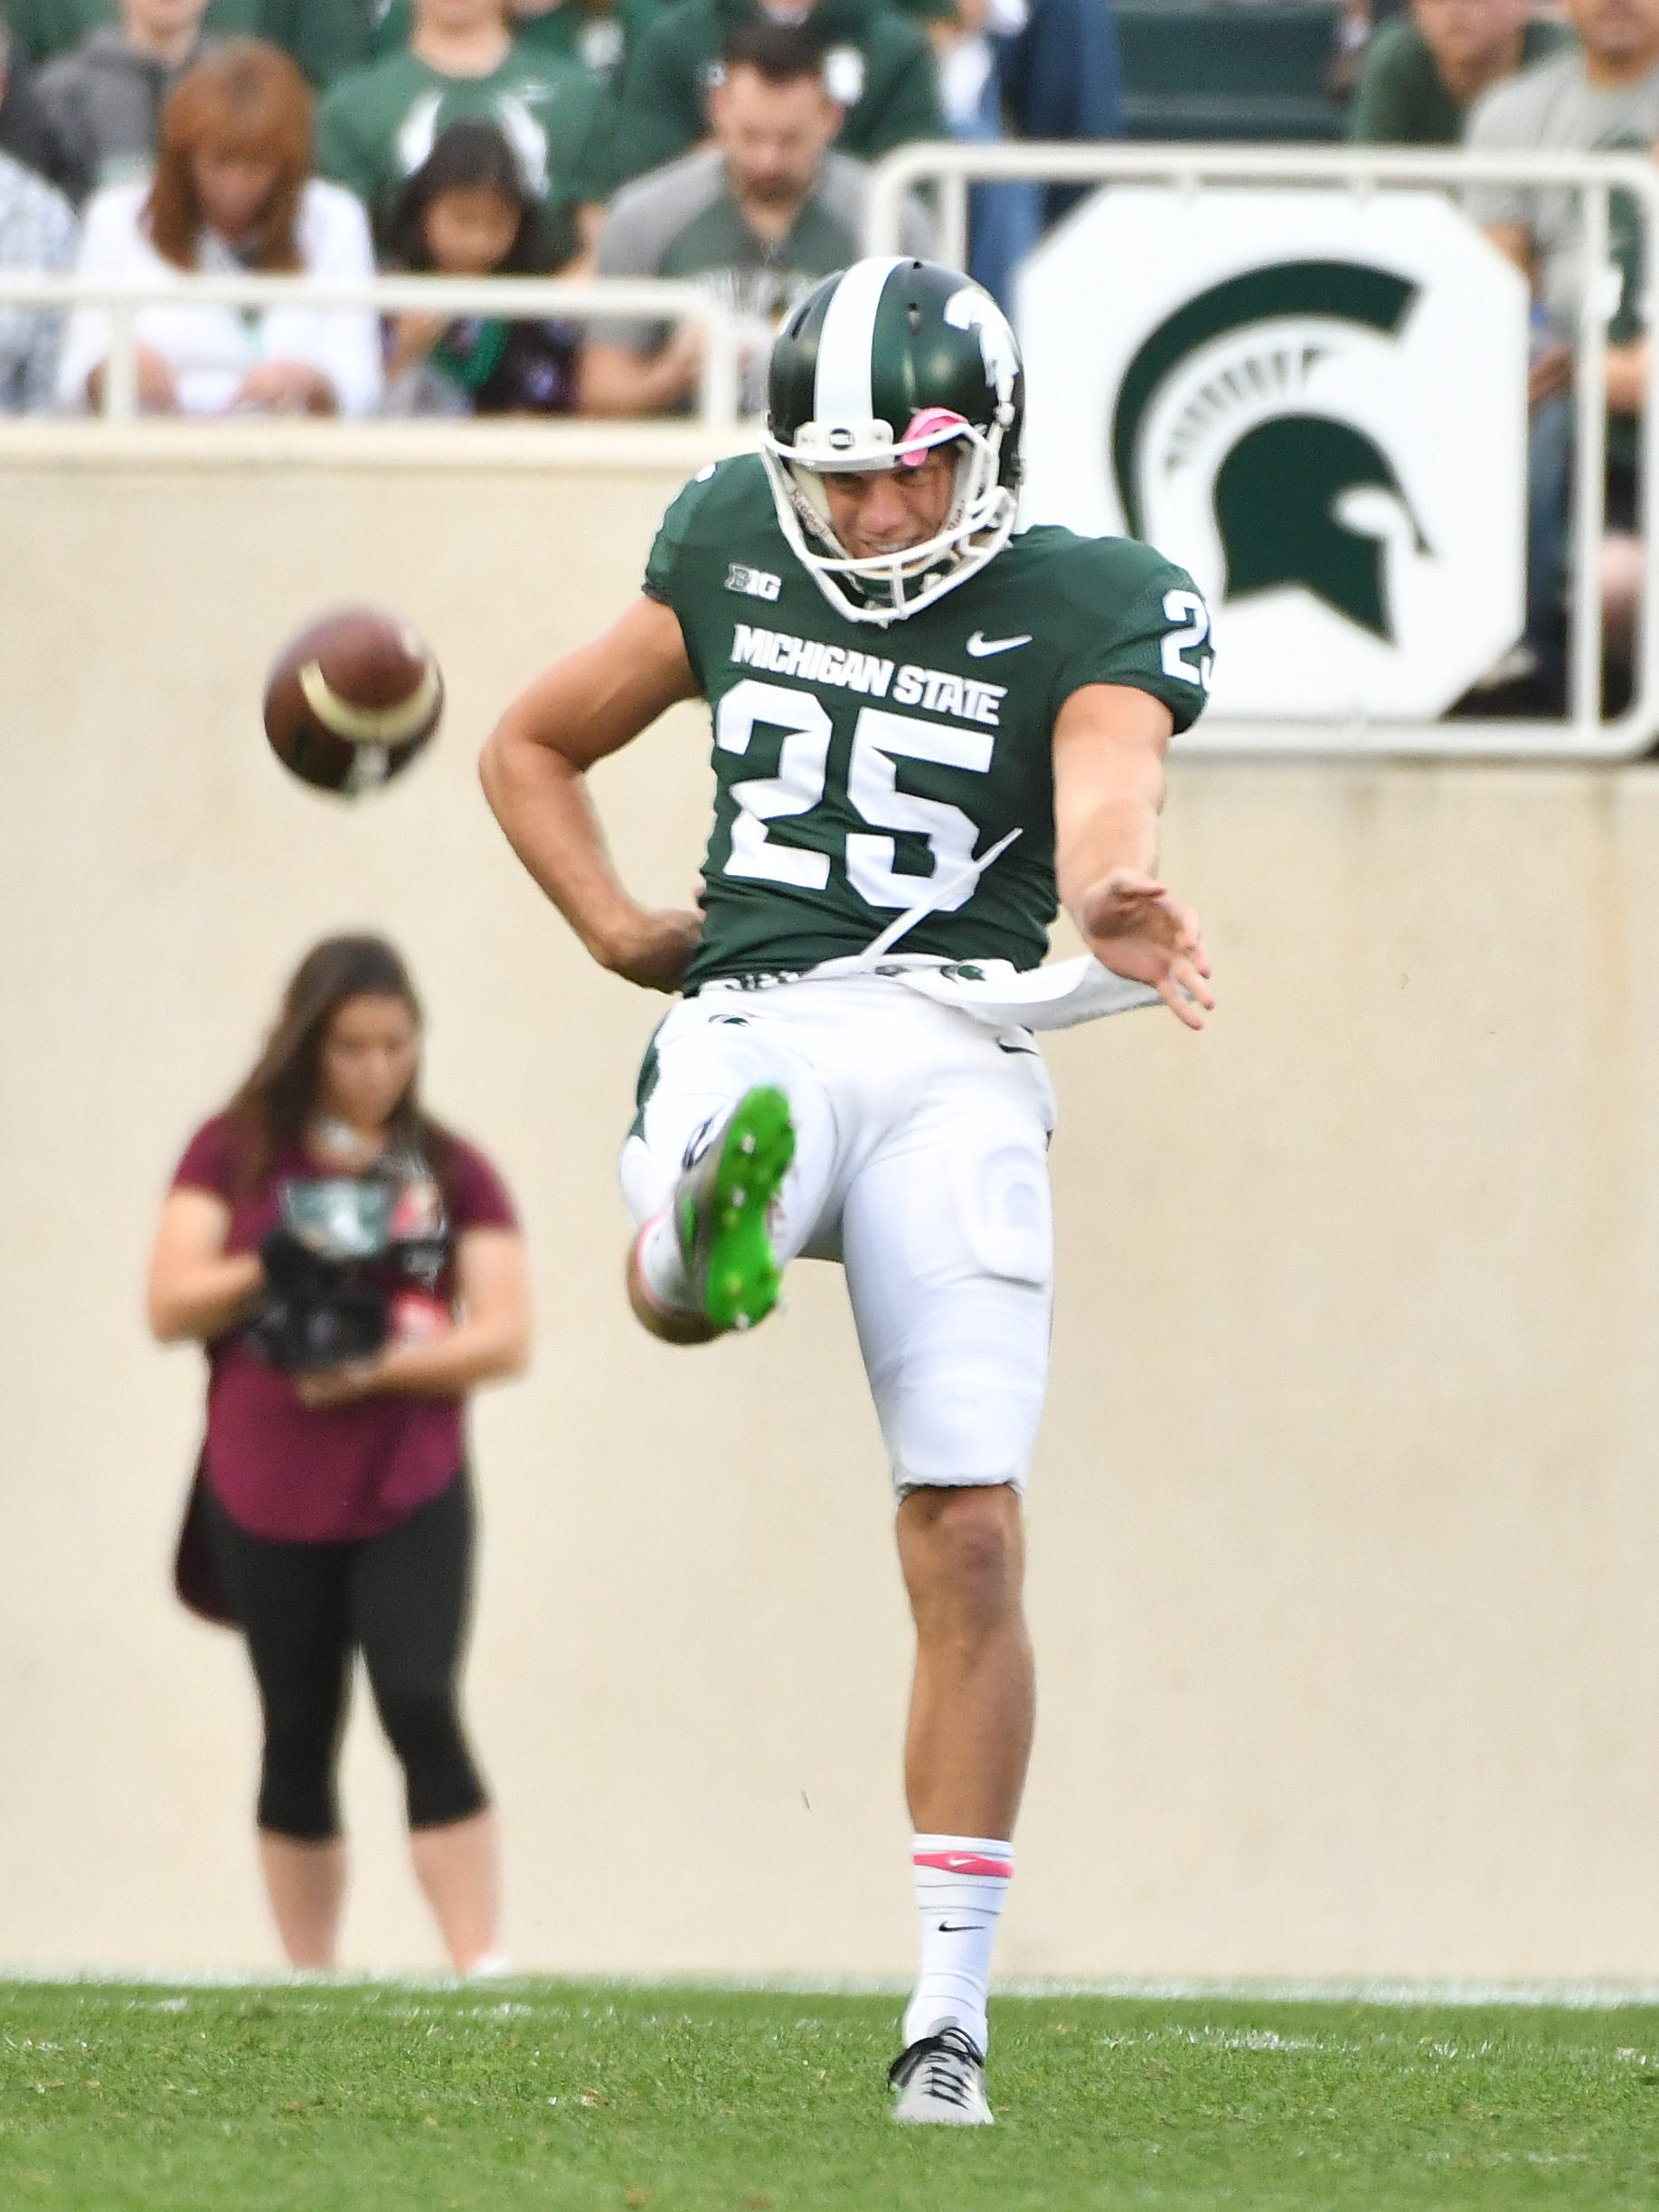 Punter – Jake Hartbarger, Sr. Not much intrigue here. This has been Hartbarger's job the last three years and will be again in 2018. Redshirt freshman Jack McKenna would be the first choice as the backup.